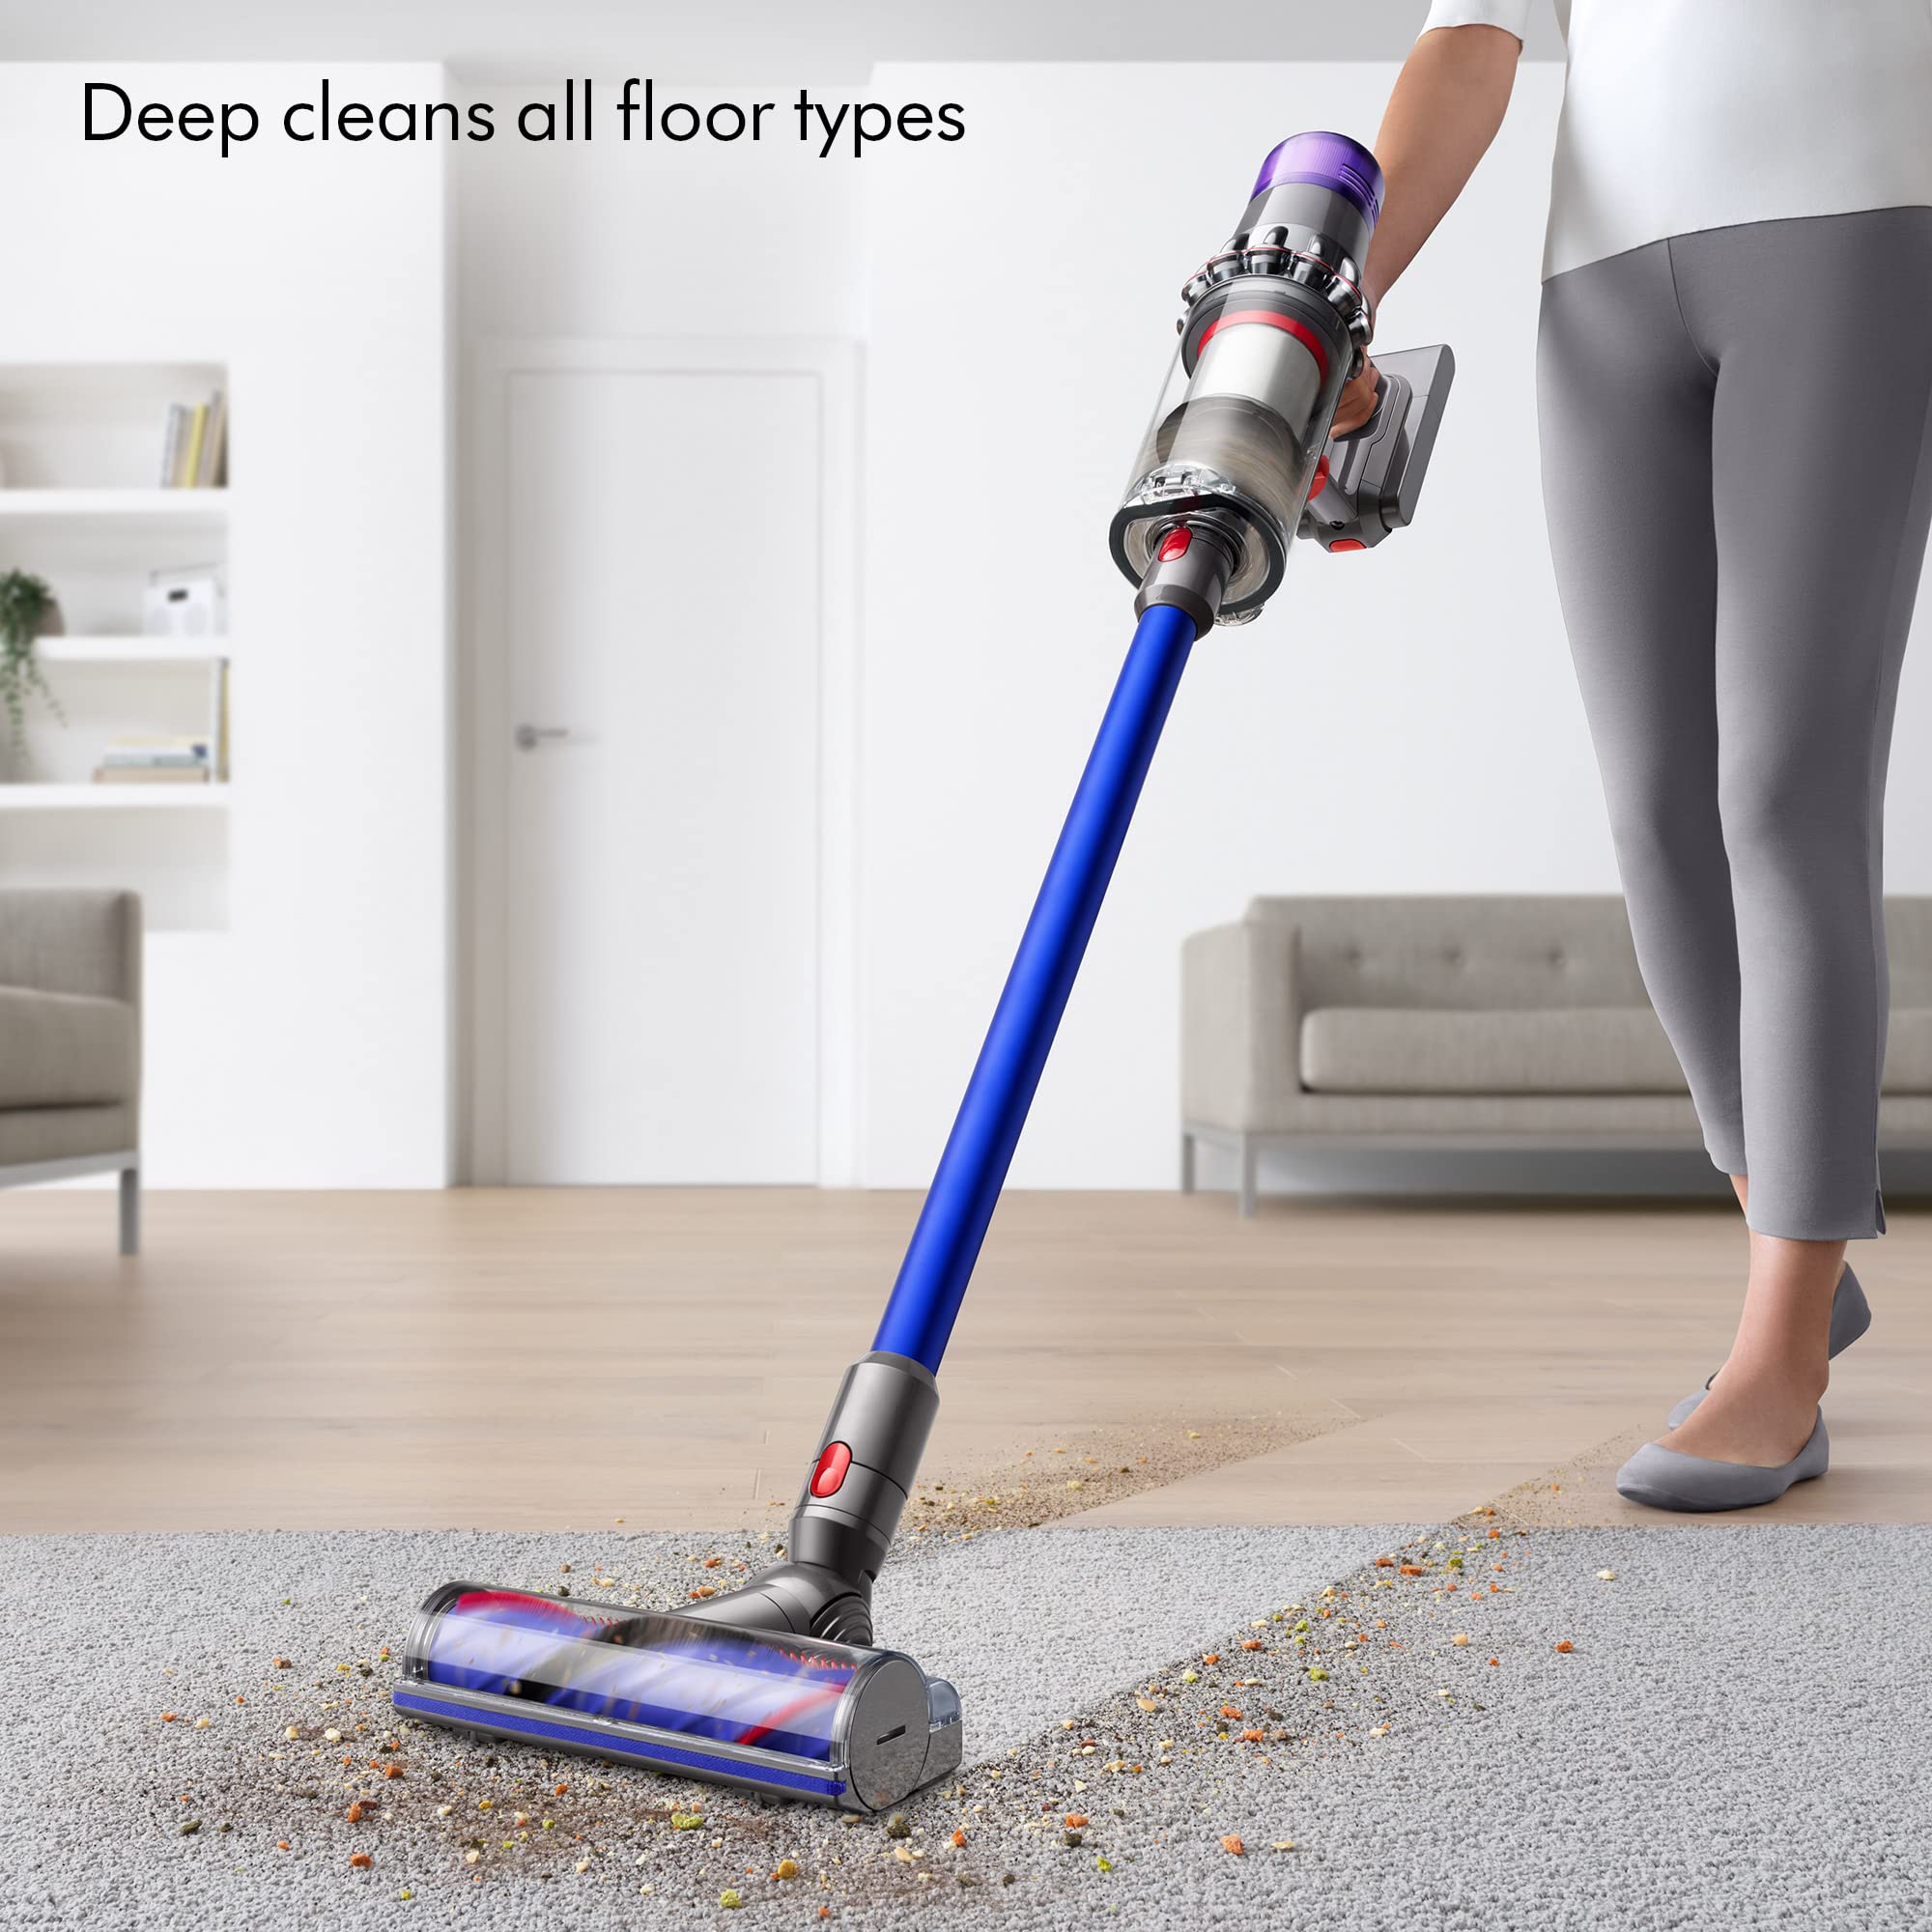 Dyson V11 Cordless Vacuum Cleaner, Nickel/Blue, Large